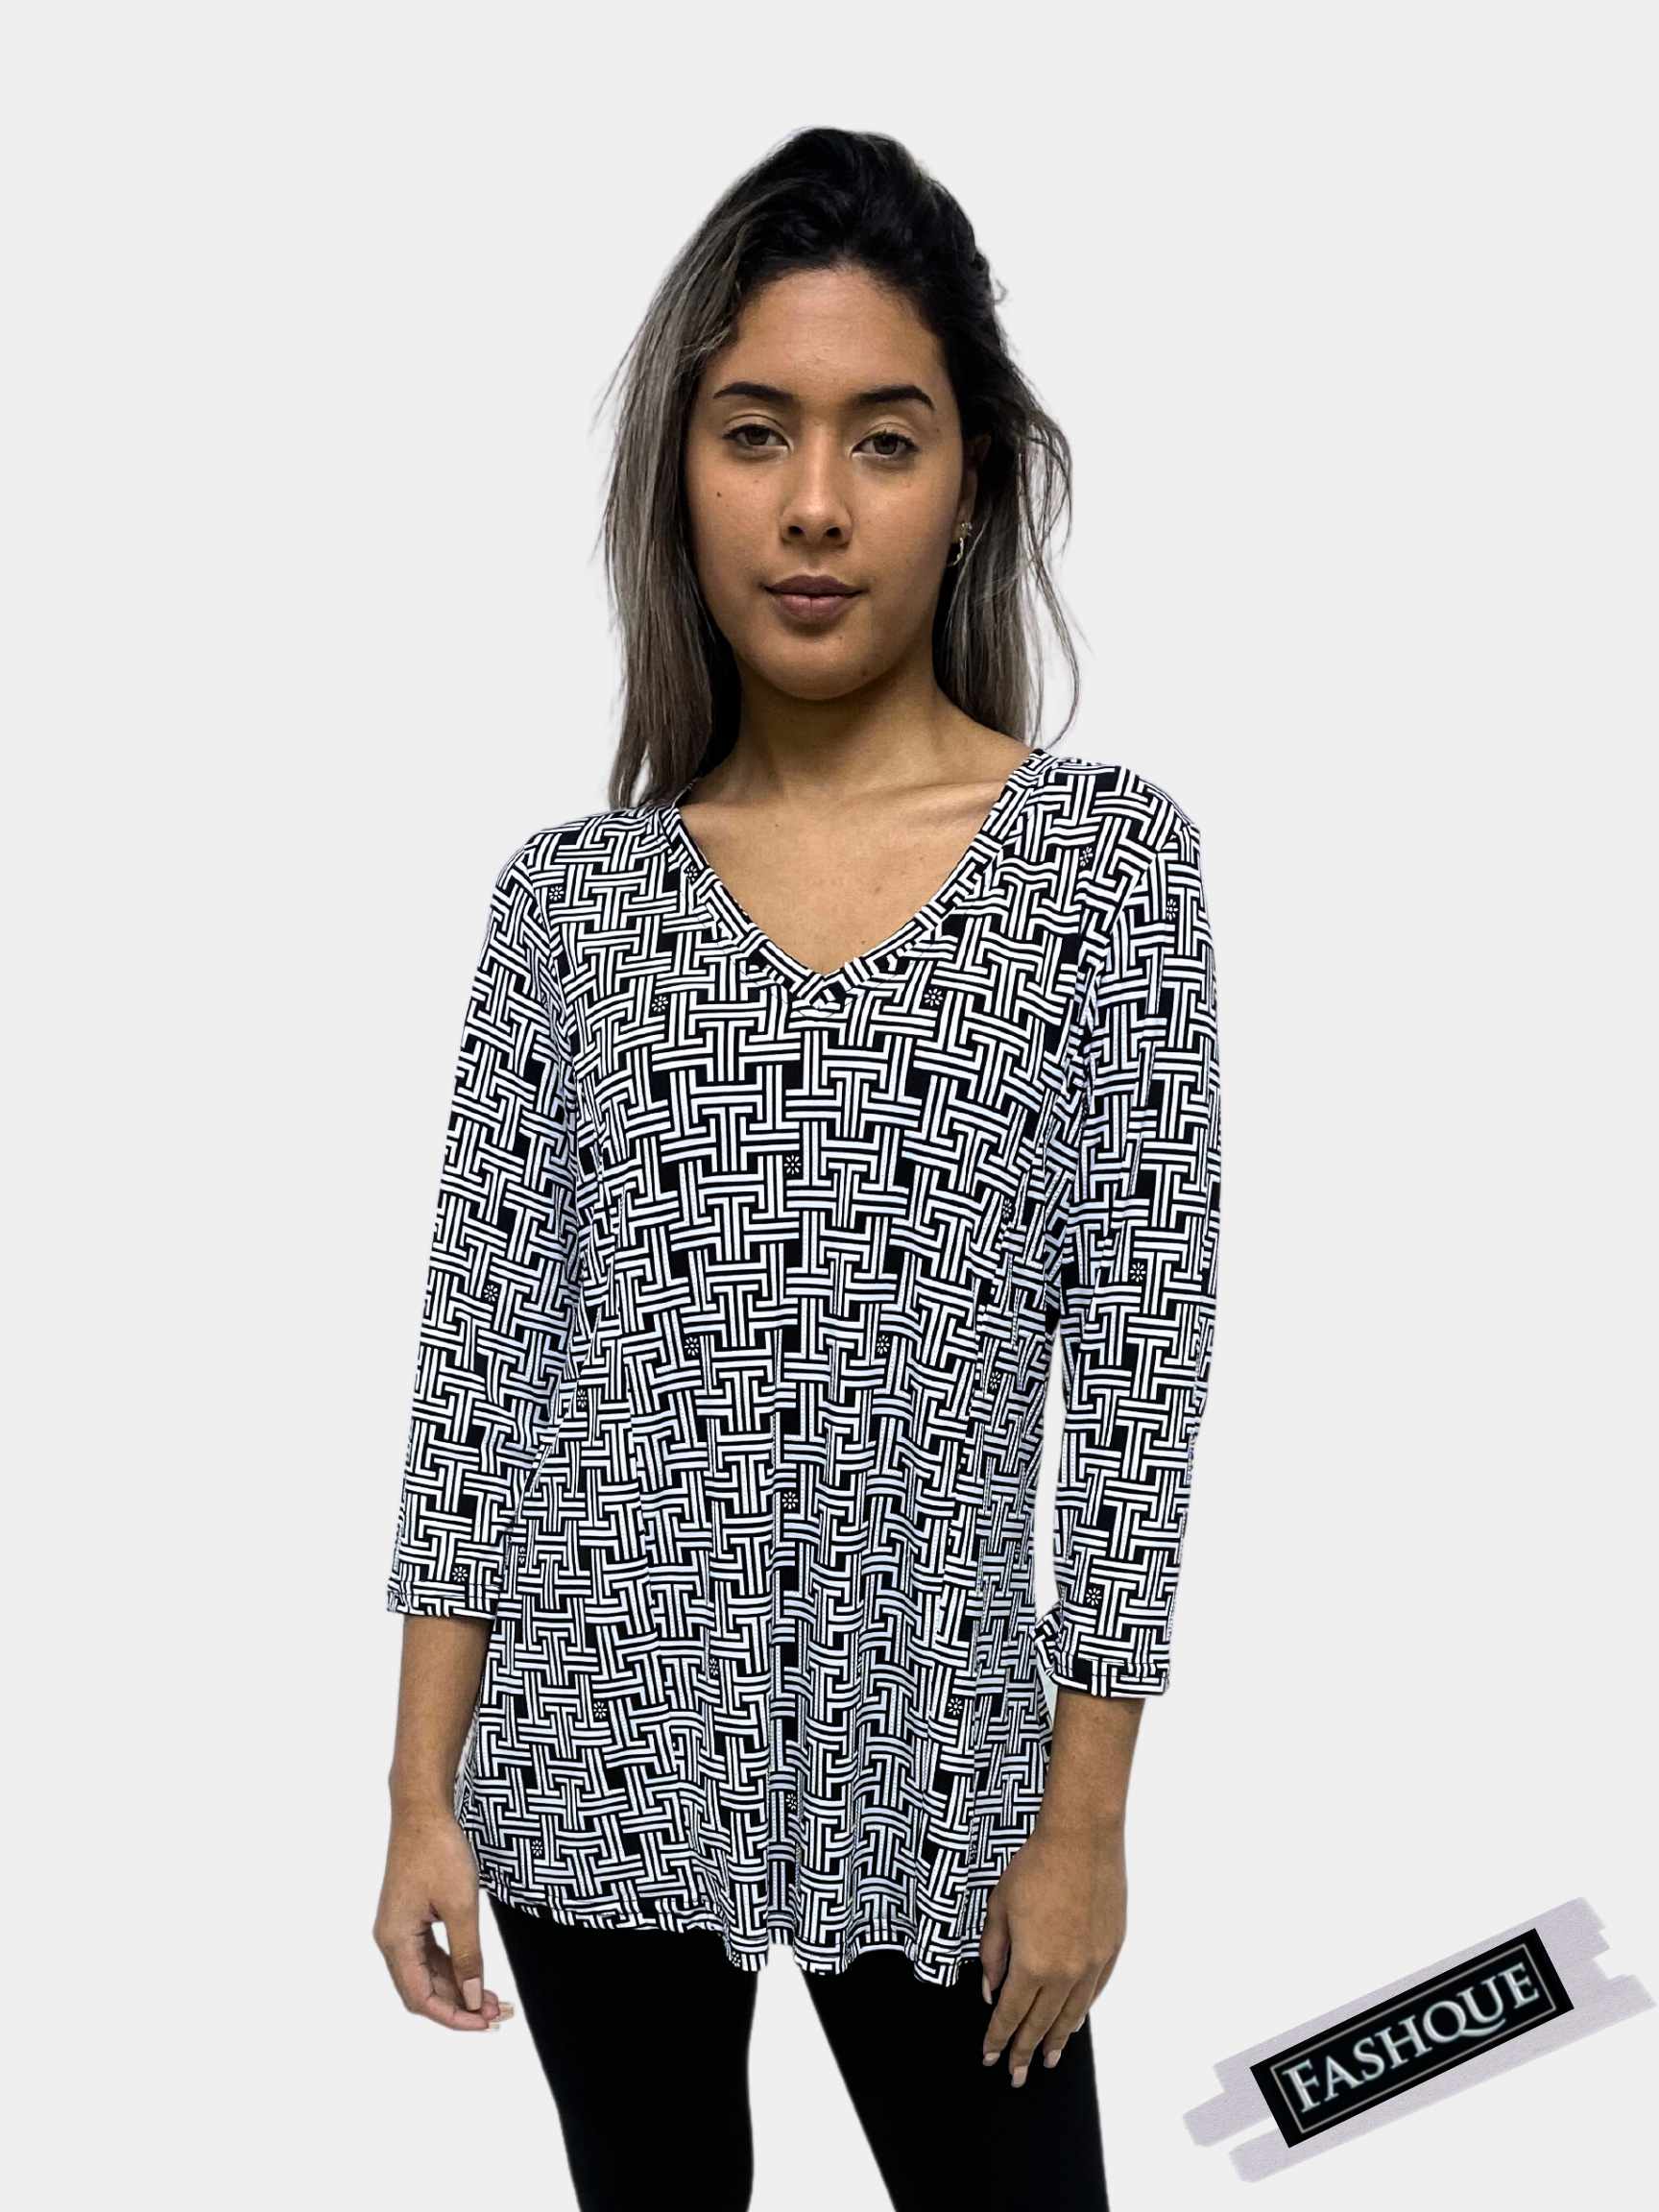 FASHQUE - 3/4 Sleeve V NECK - CASUAL Workwear Loose Tunic Top - T643